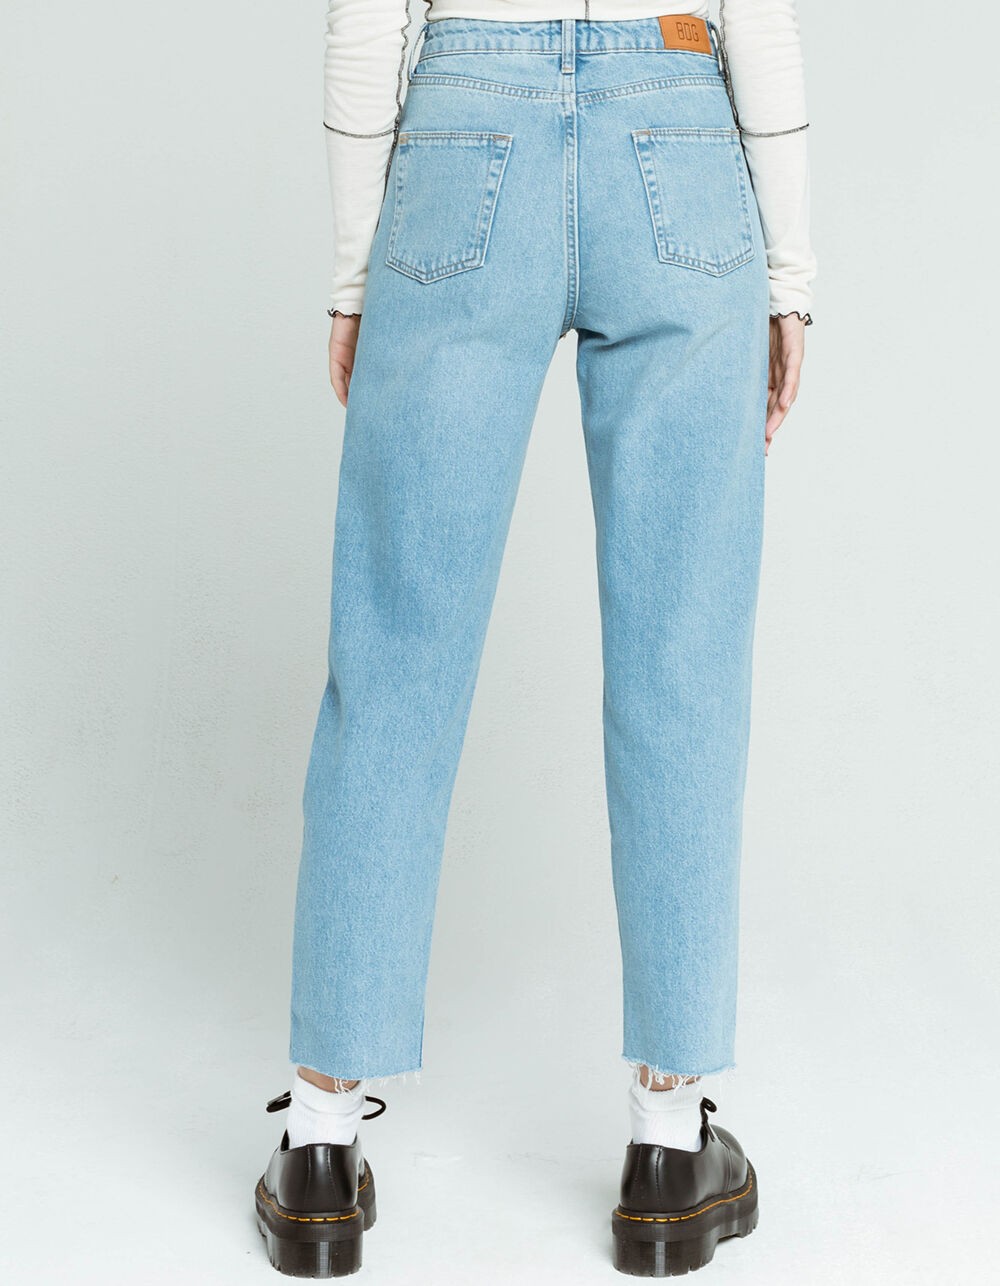 BDG Urban Outfitters Pax Tapered Womens Vintage Medium Jeans - VINME ...